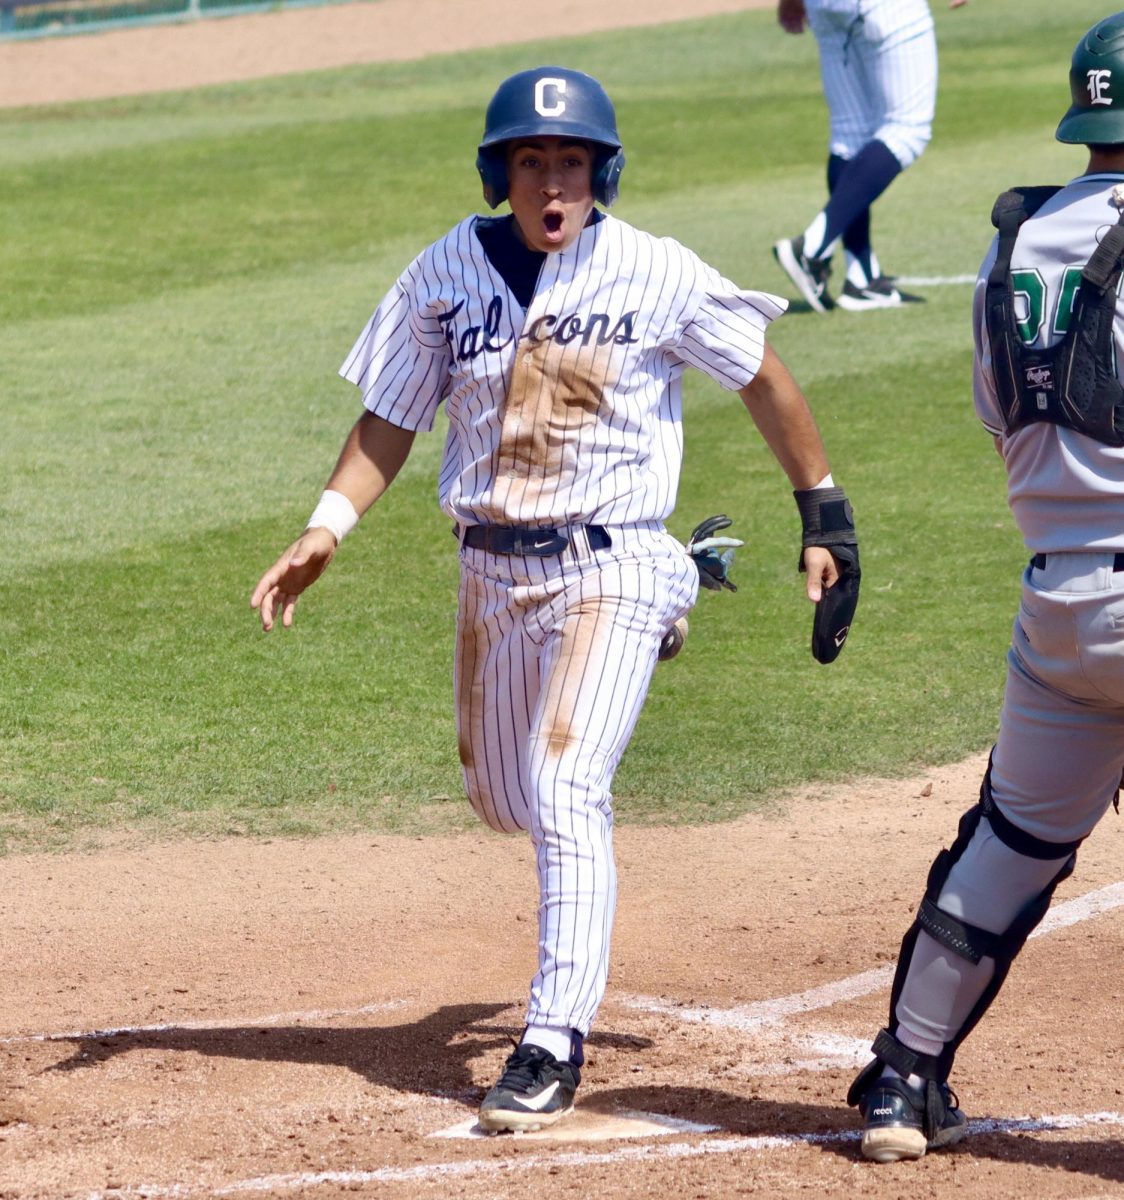 Outfielder, Diego Orozco, yelling as he crosses home plate to score for the Falcons. Photo credit: Joel Carpio